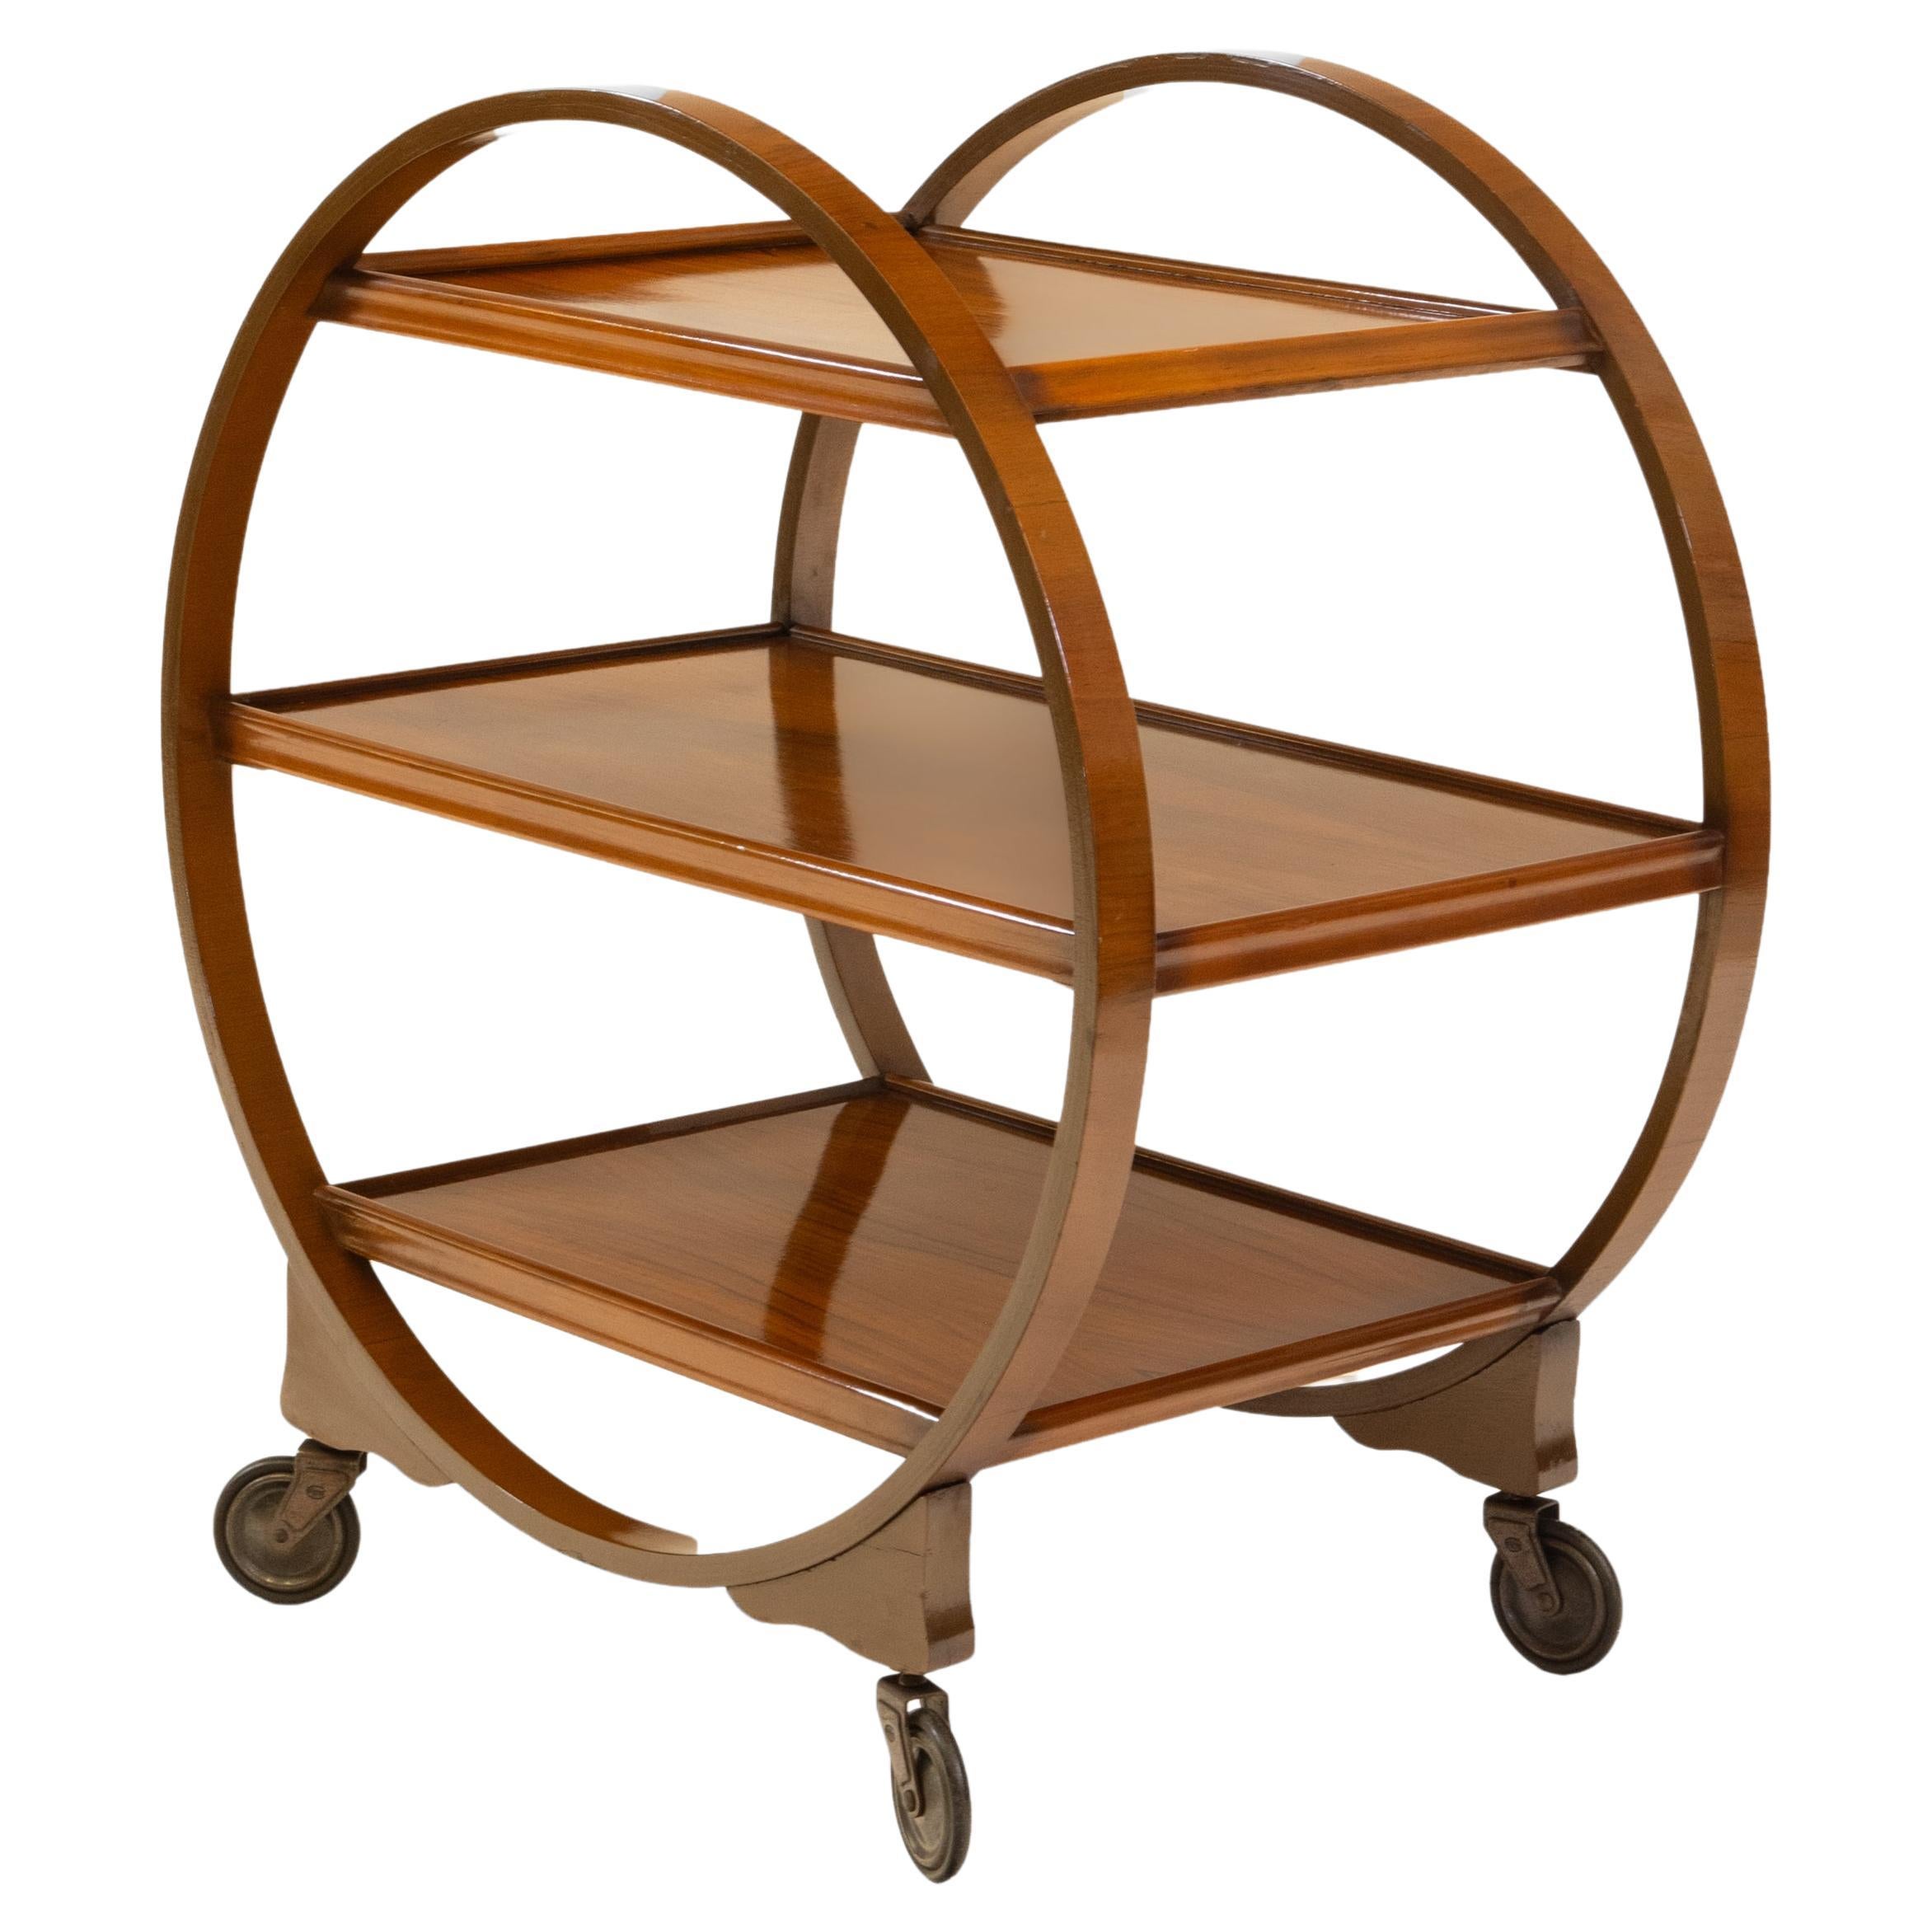 1930s English Art Deco Walnut Round Drinks Cocktail Trolley Modernist Bar Cart For Sale